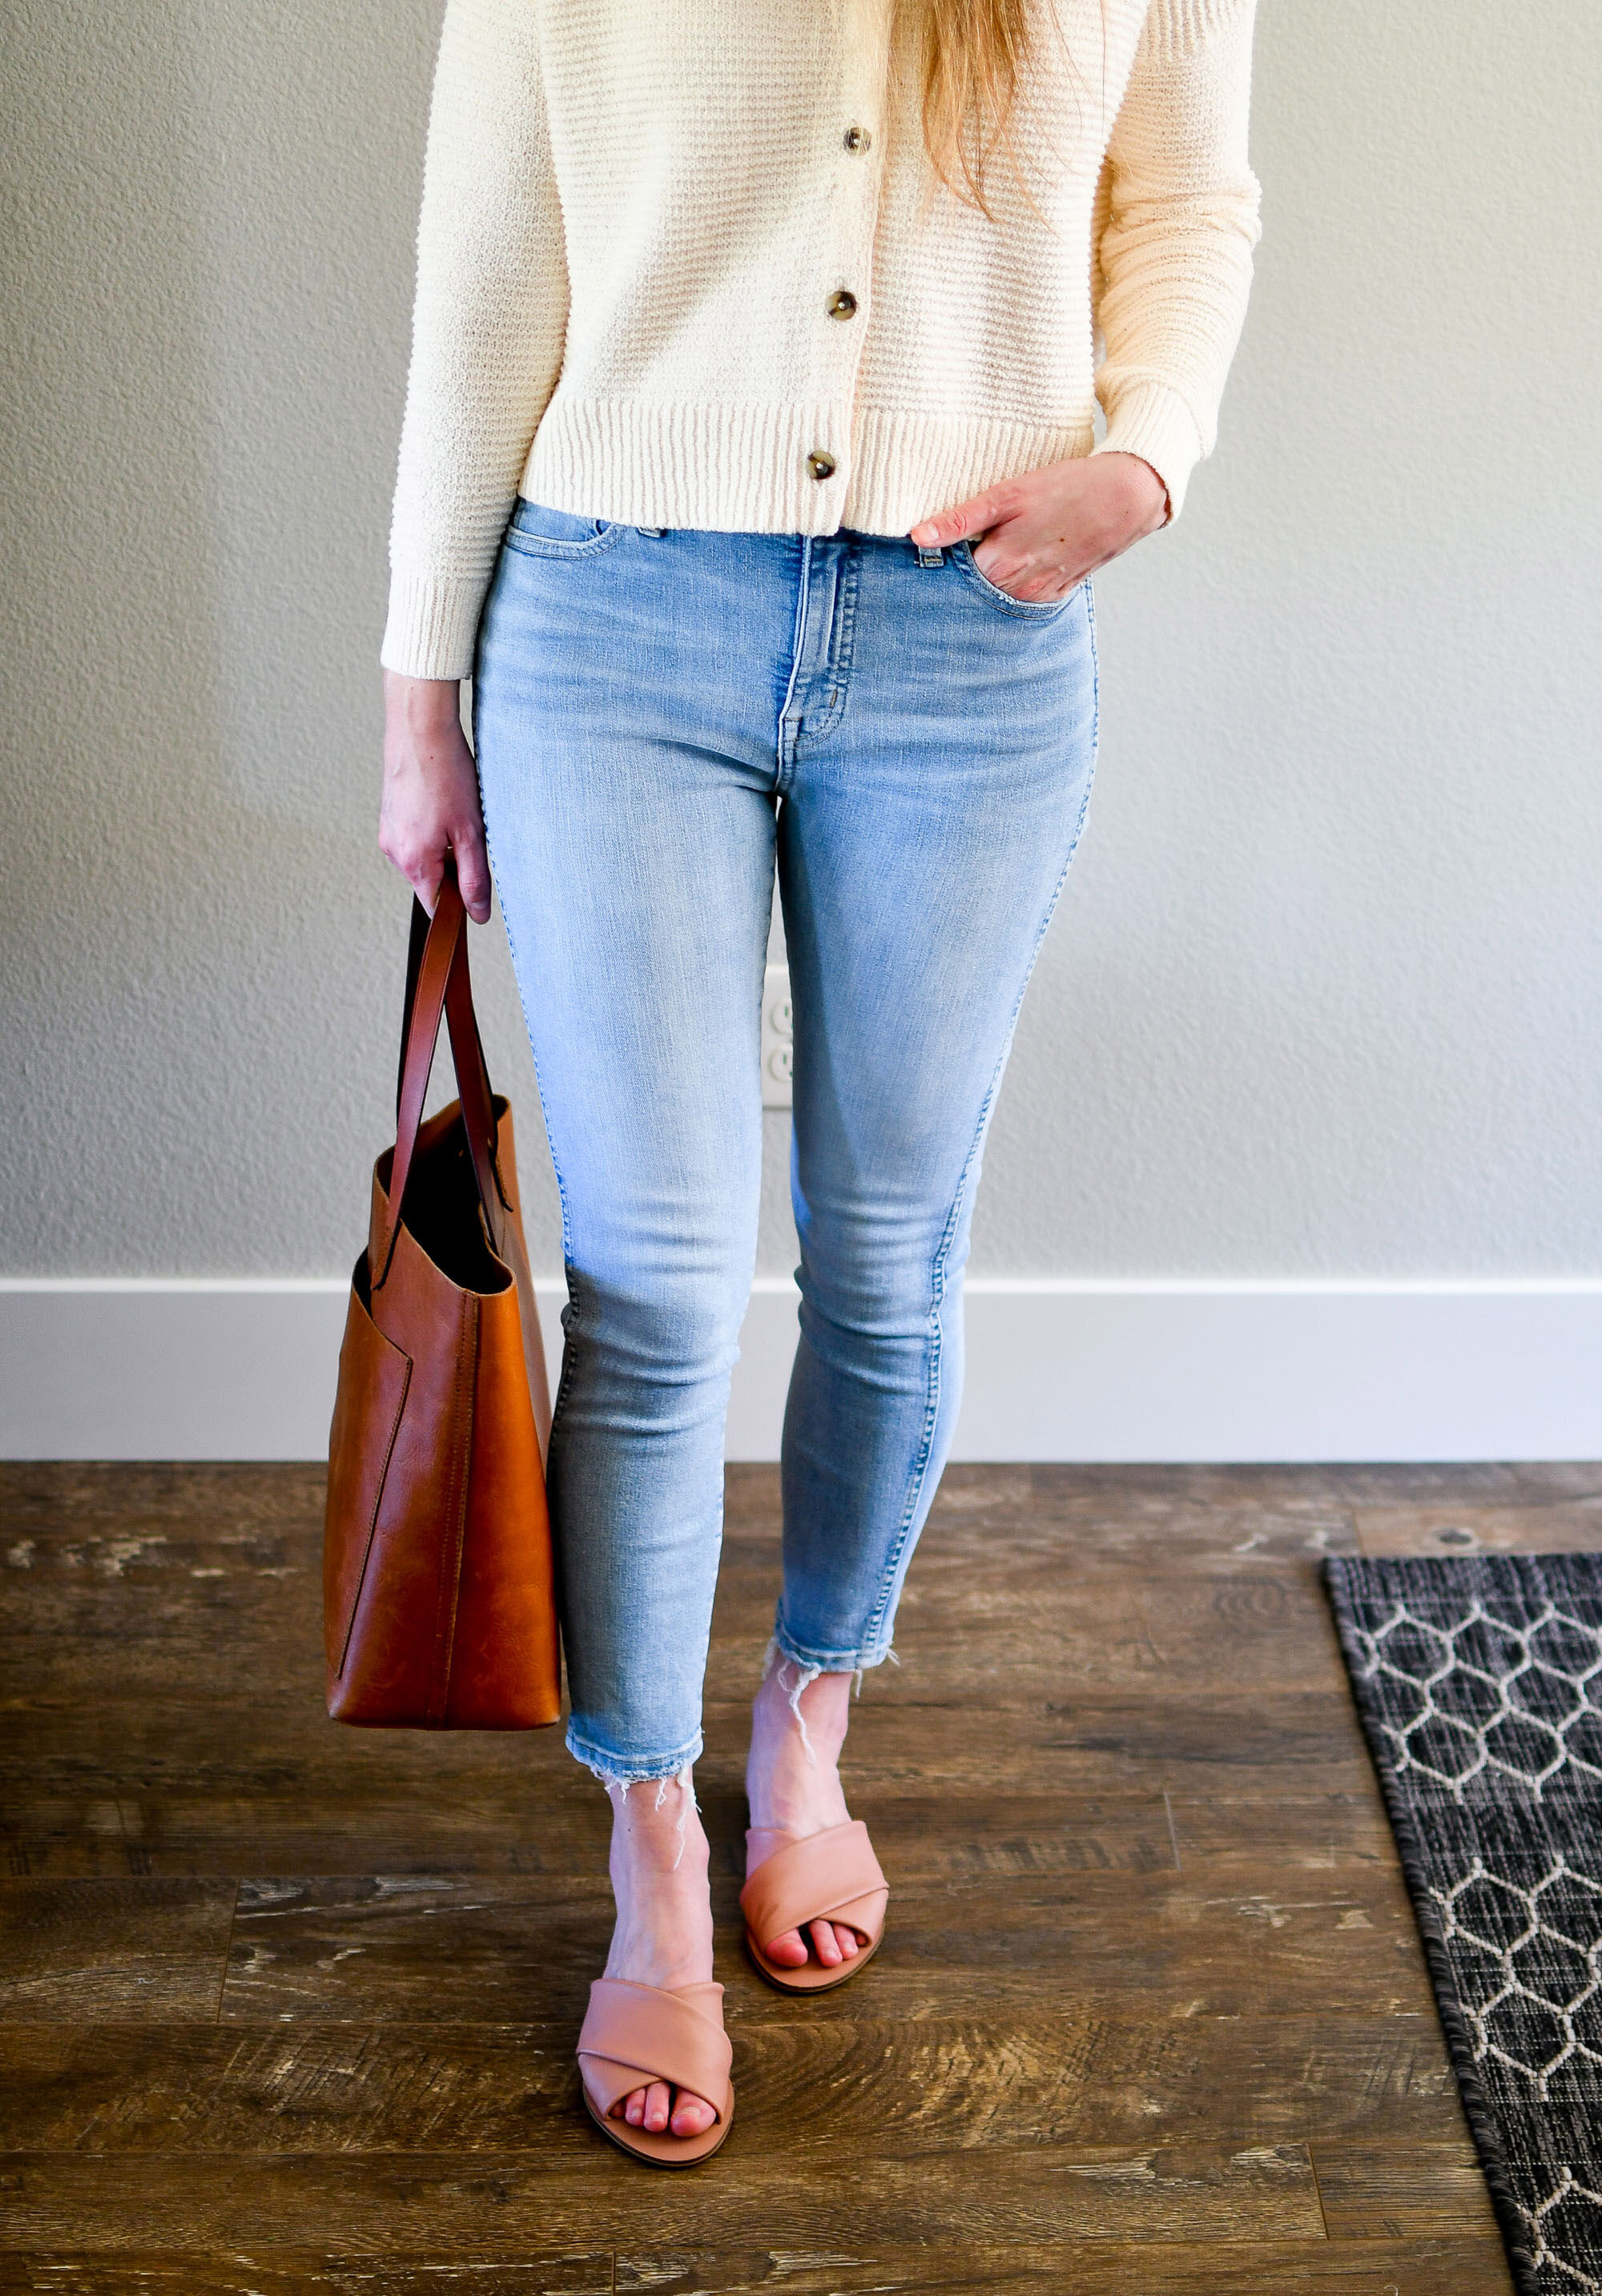 Madewell spring outfit: Deville cardigan sweater, skinny jeans in Wheeler wash, medium Transport tote — Cotton Cashmere Cat Hair